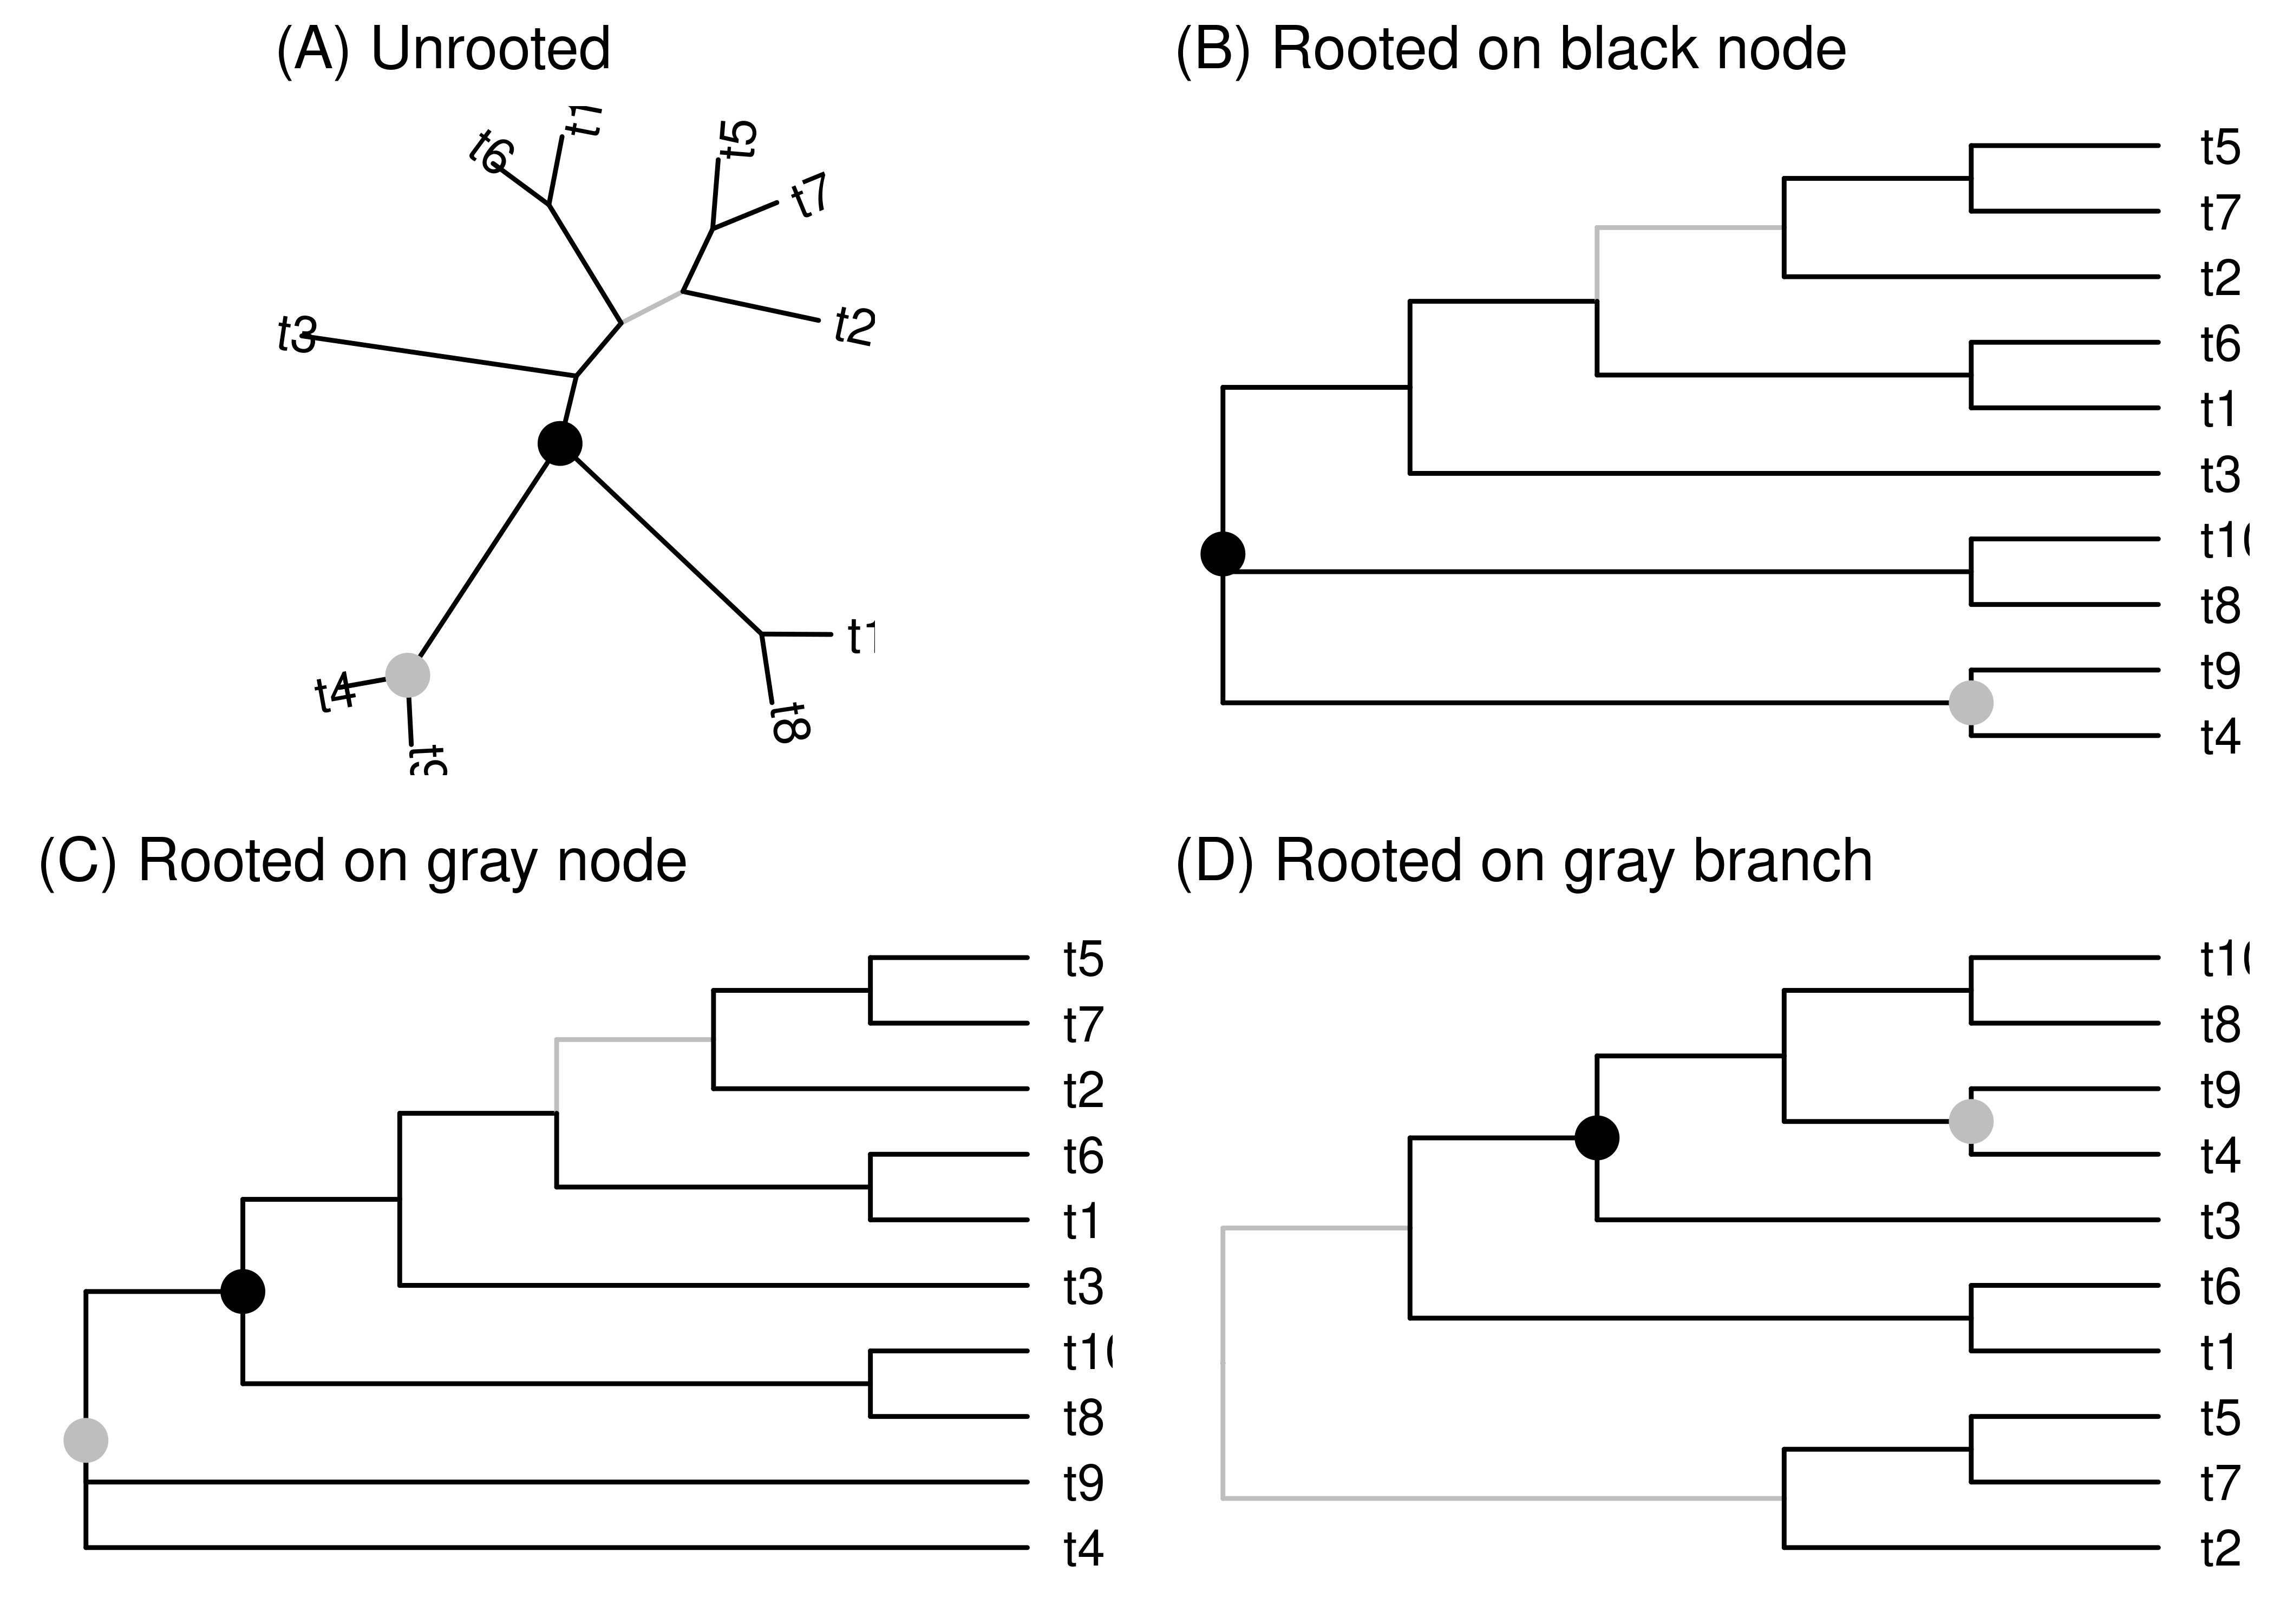 These four cladograms have the same tips and same topology, only their layout differs. (A) The first layout is unrooted. The other layouts are rooted on the black node (B), gray node (C), and gray branch (D). Each of these elements are in the exact same topological positions in all trees. When the tree is rooted on the black or gray nodes, the base of the tree is a polytomy since these nodes have three branches attached to them. No nodes are added or removed when rooting on a node. When rooting on the gray branch, a new unrooted node is added along the branch. This new node is bifurcating.